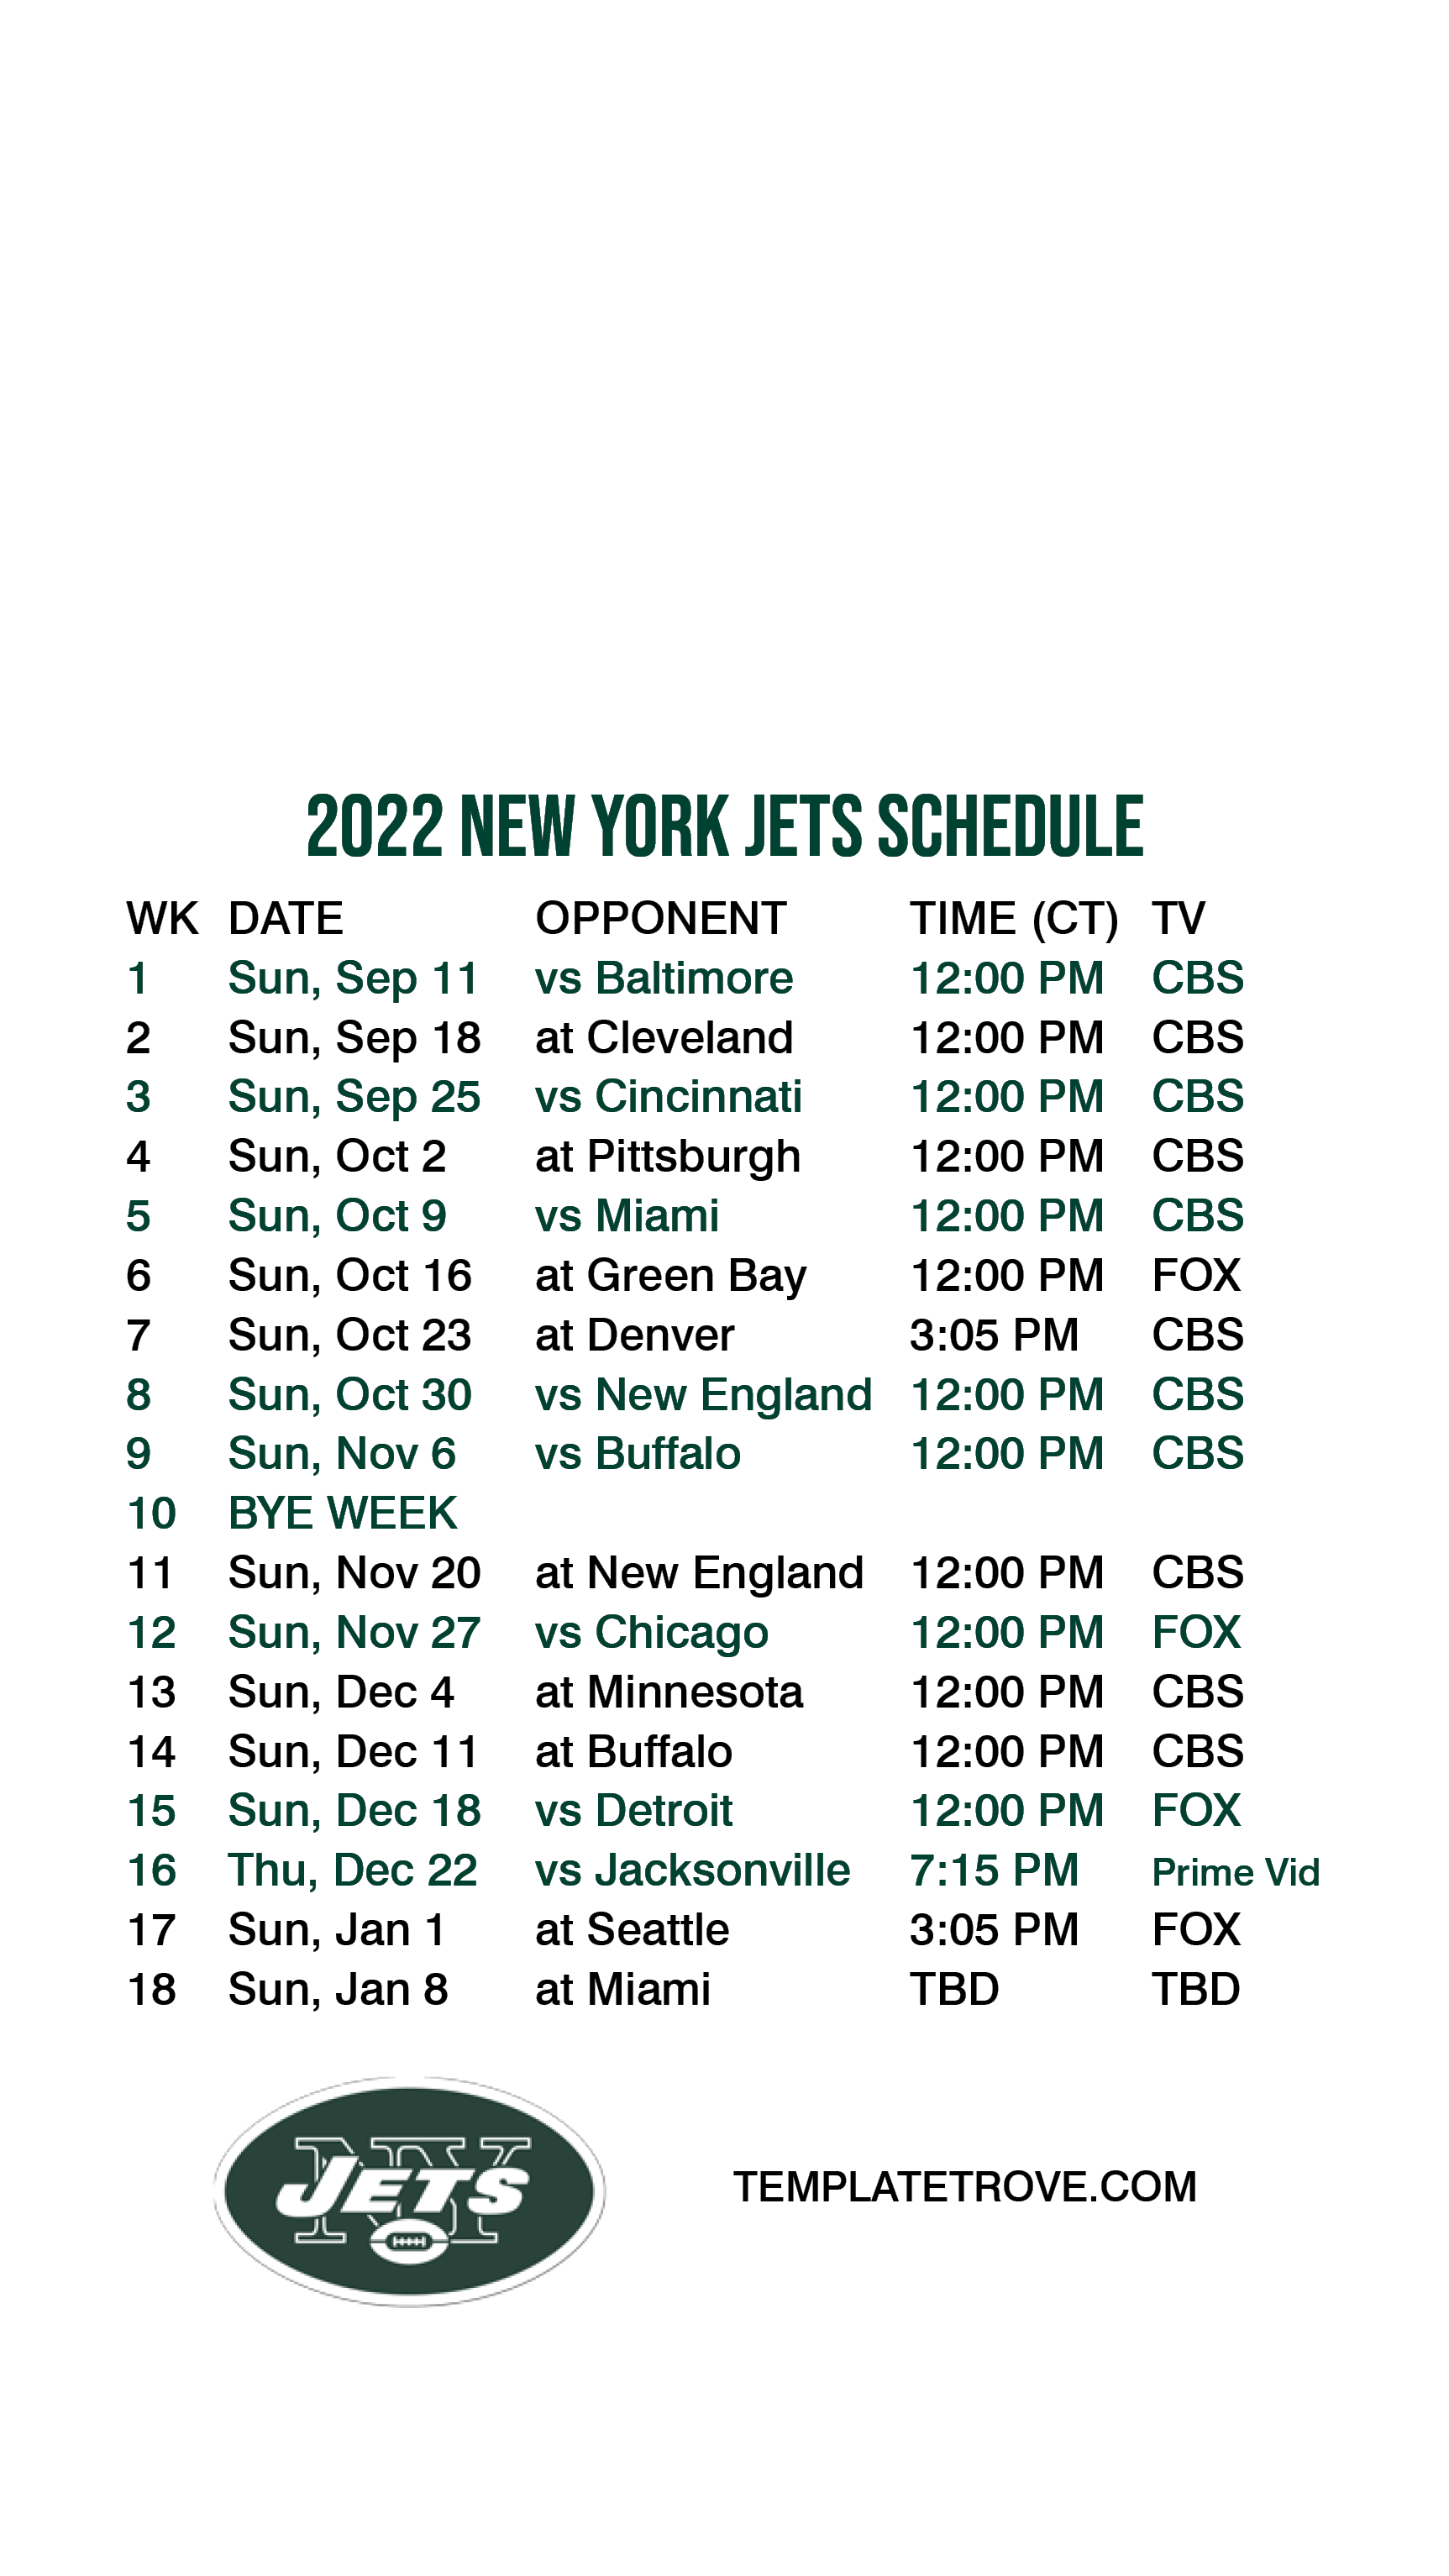 2022-2023-new-york-jets-lock-screen-schedule-for-iphone-6-7-8-plus